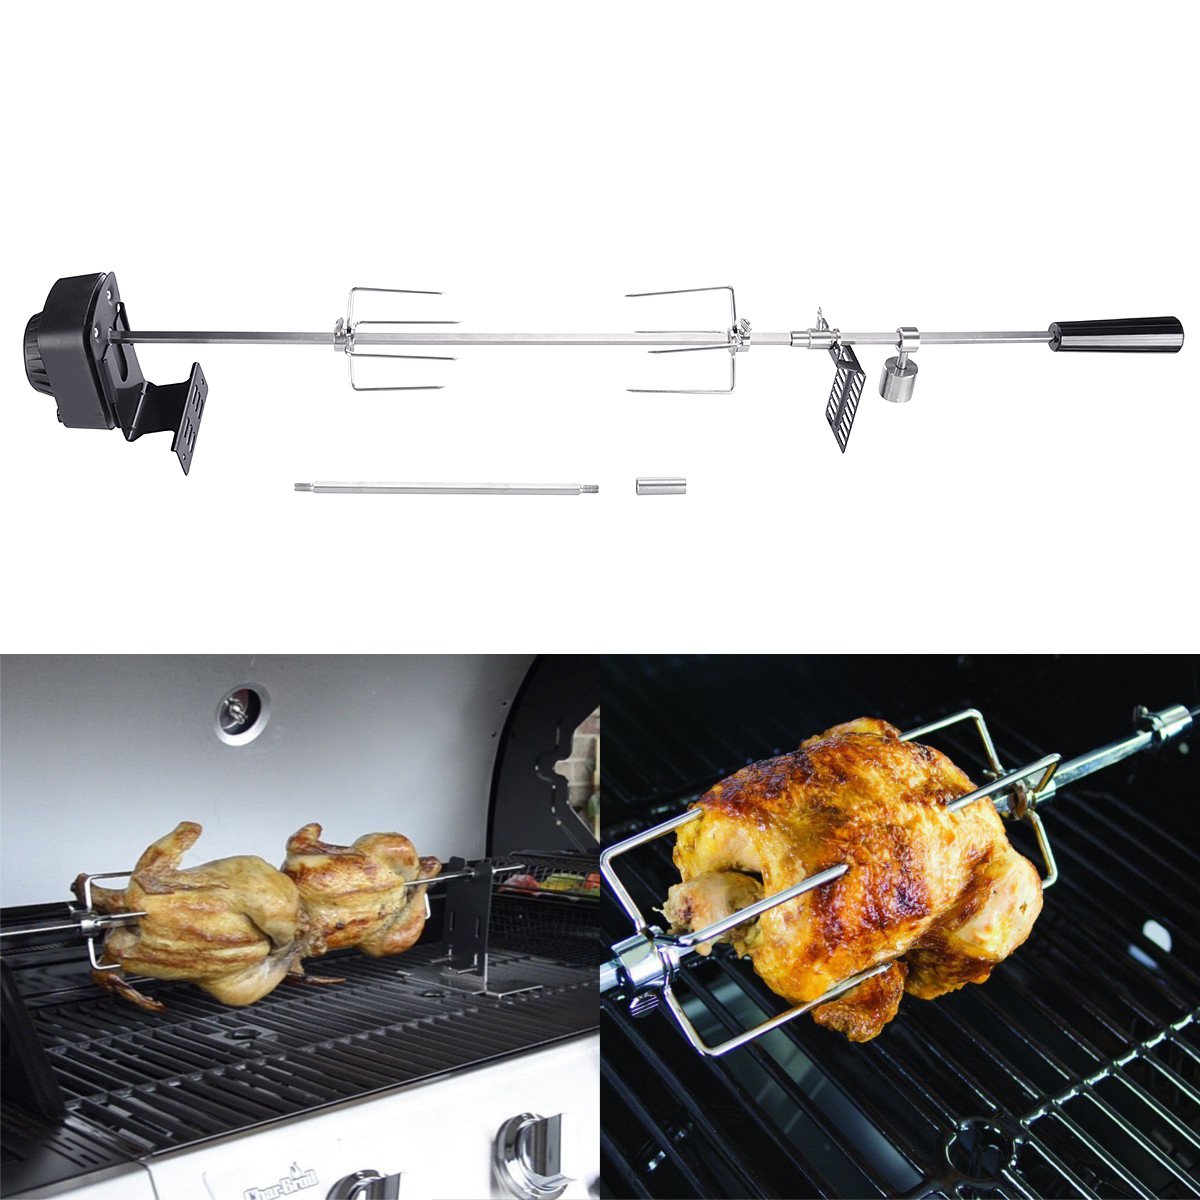 

4W Stainless Steel Grill Rotisserie Spit Roaster Rod Camping Charcoal BBQ Kits